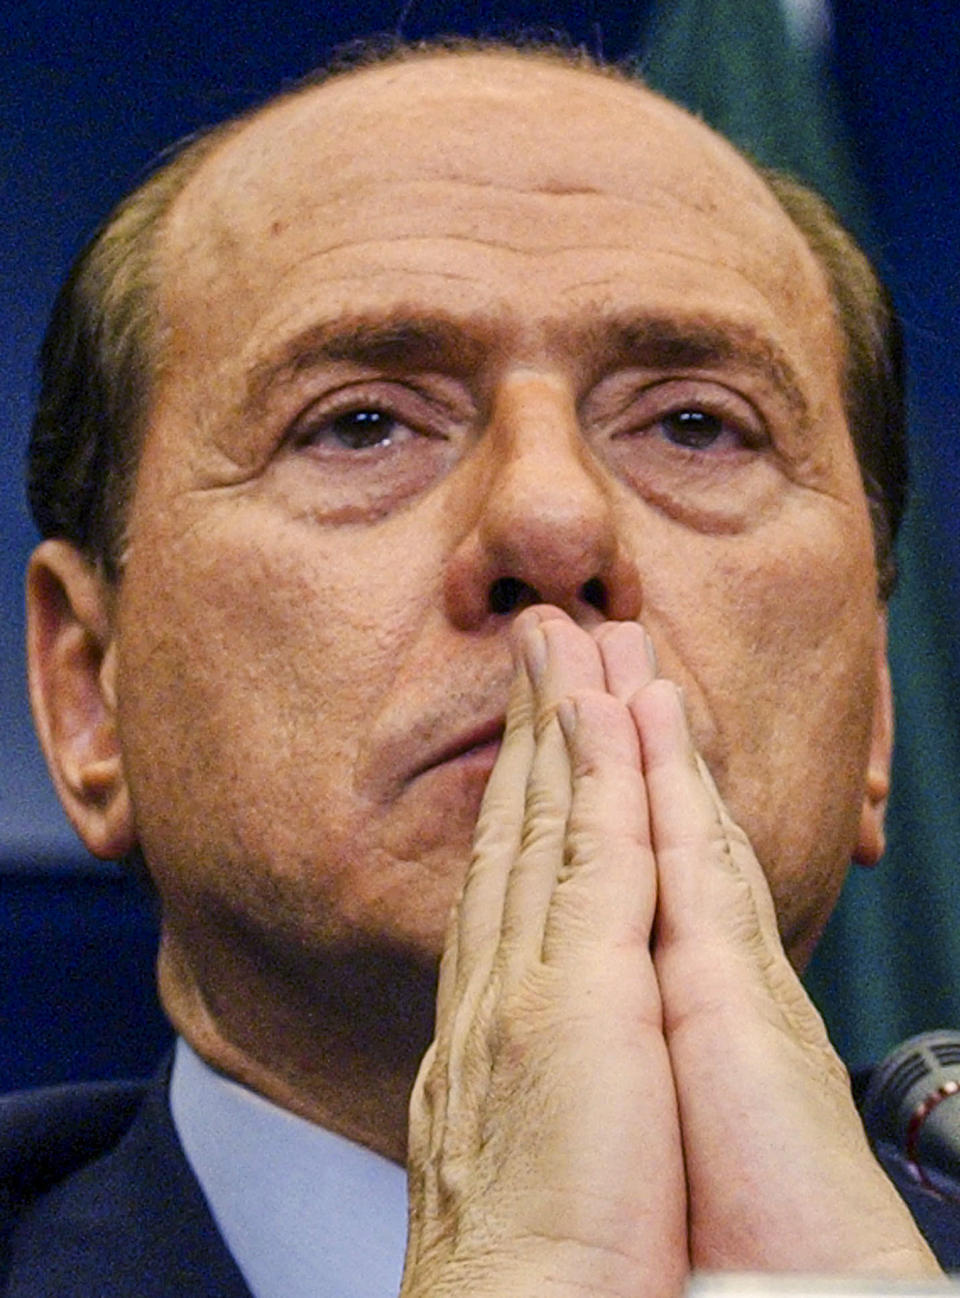 Italian Premier Silvio Berlusconi attends the final press conference at the end of a two-day EU Commission meeting at the EU Council headquarters in Brussels, Saturday, Dec. 13, 2003. Silvio Berlusconi died Monday, June 12, 2023. Whether and how Berlusconi’s Forza Italia party survives is being quietly discussed on the inside pages of newspapers and the back corridors of parliament. (AP Photo/Domenico Stinellis)